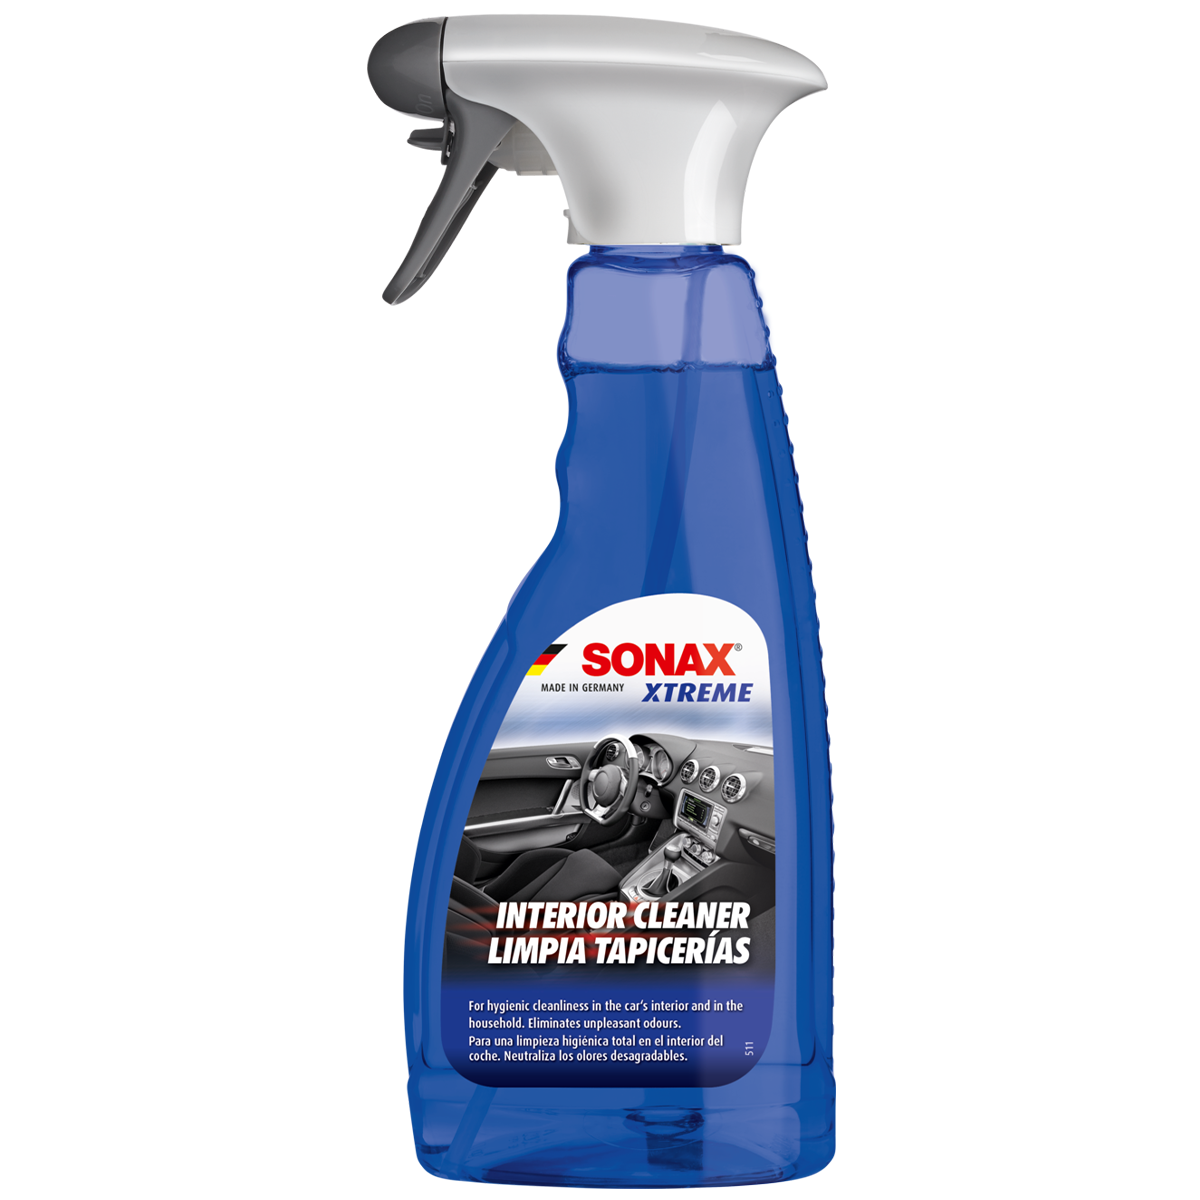 SONAX XTREME Interior Strong Cleaner 500ml